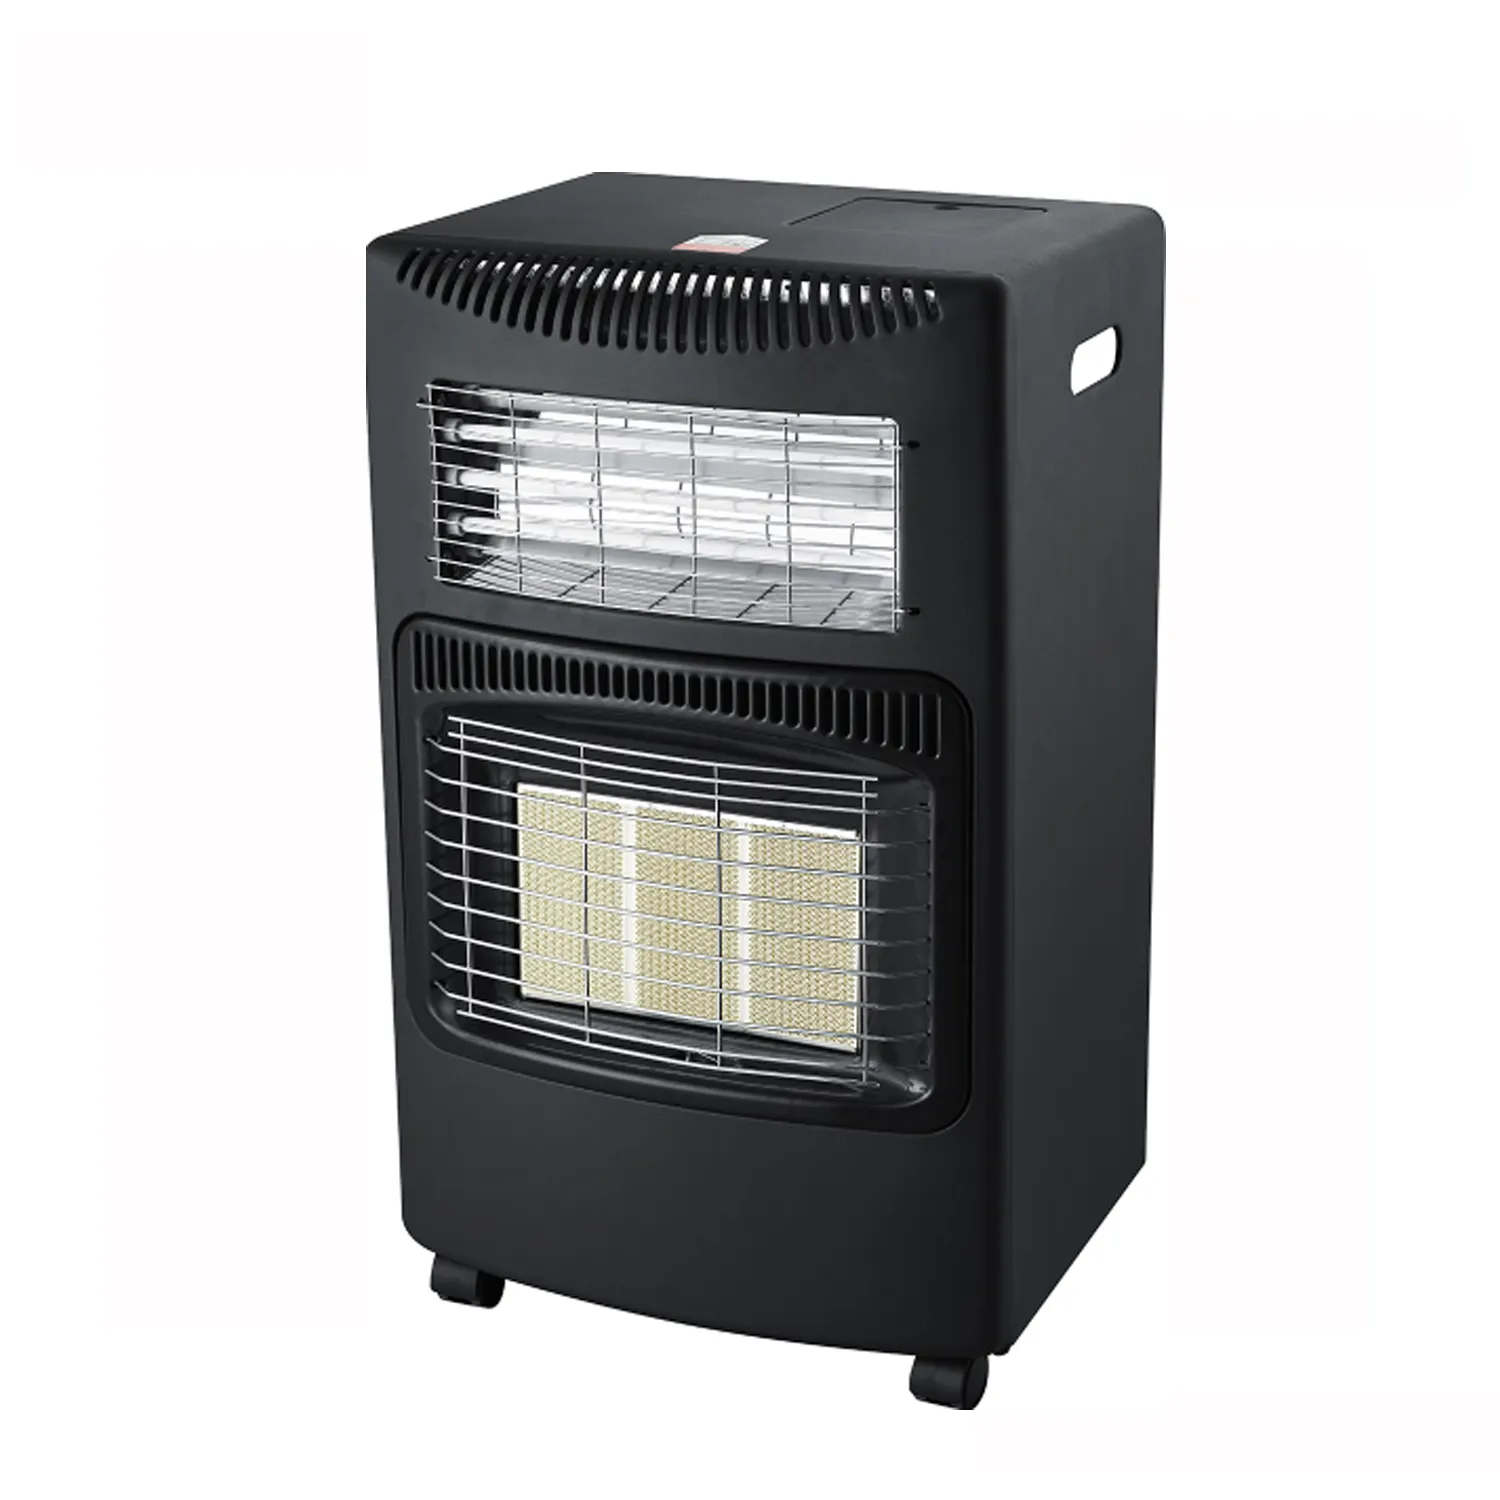 China Supplier over 12 years old ODM OEM Latest Product Portable Electric and Gas Heater Indoor